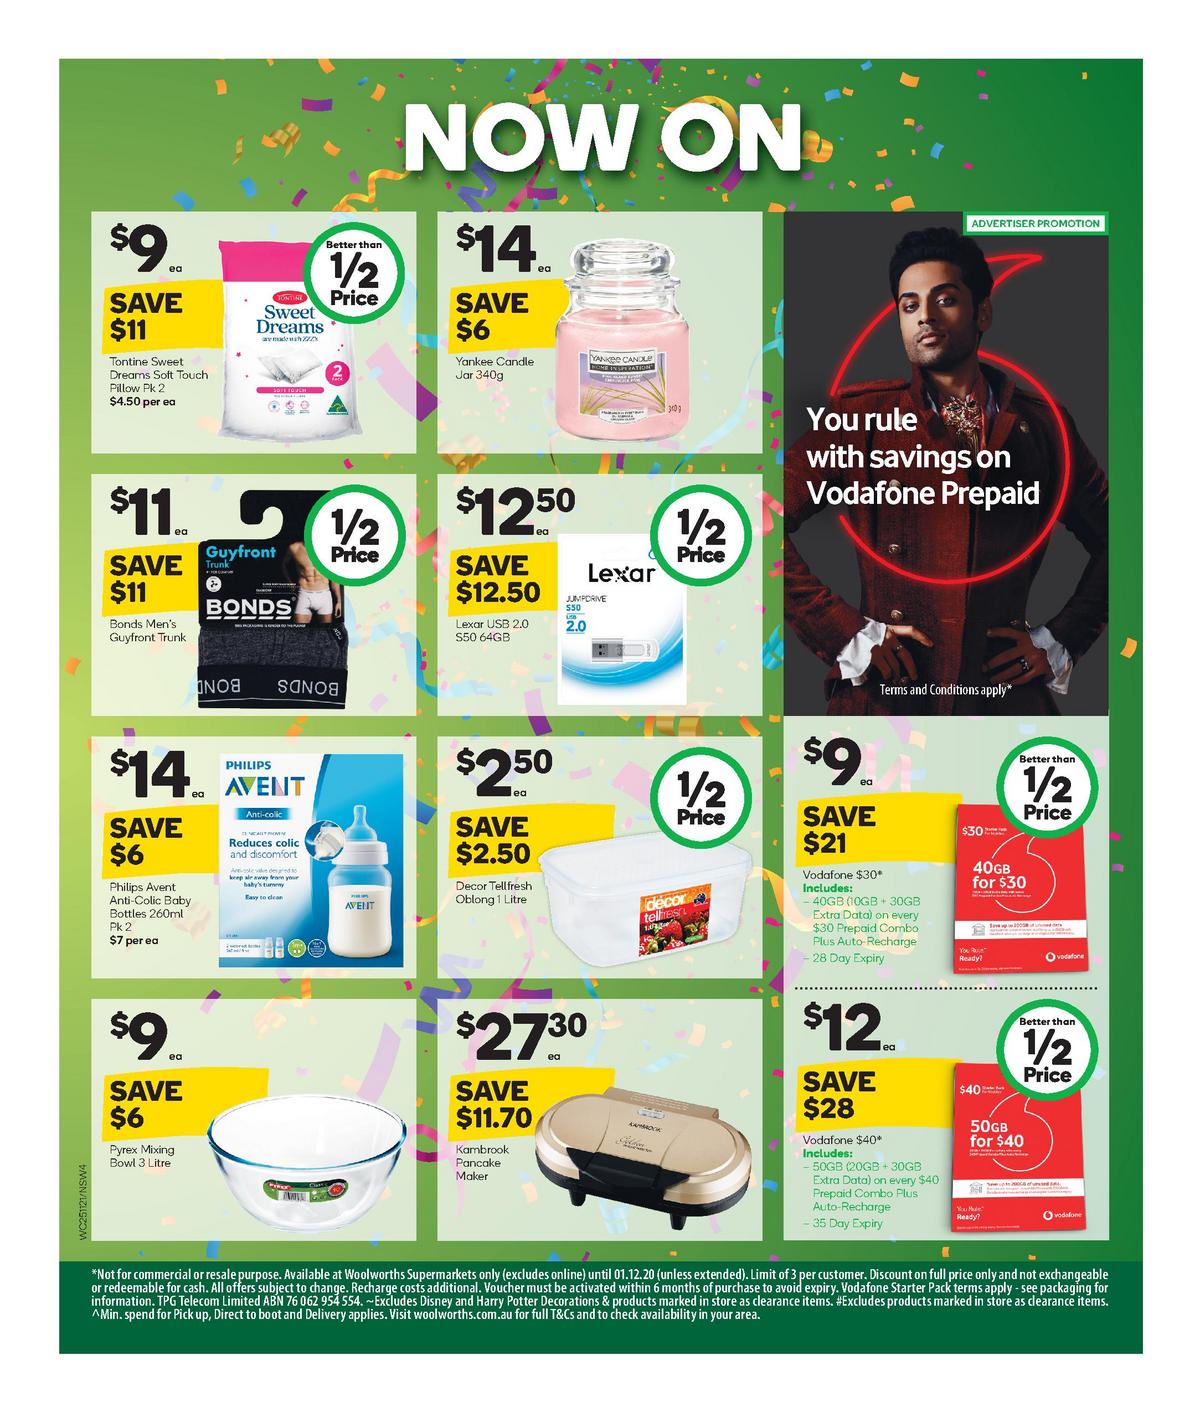 Woolworths Super Sale Catalogues from 25 November